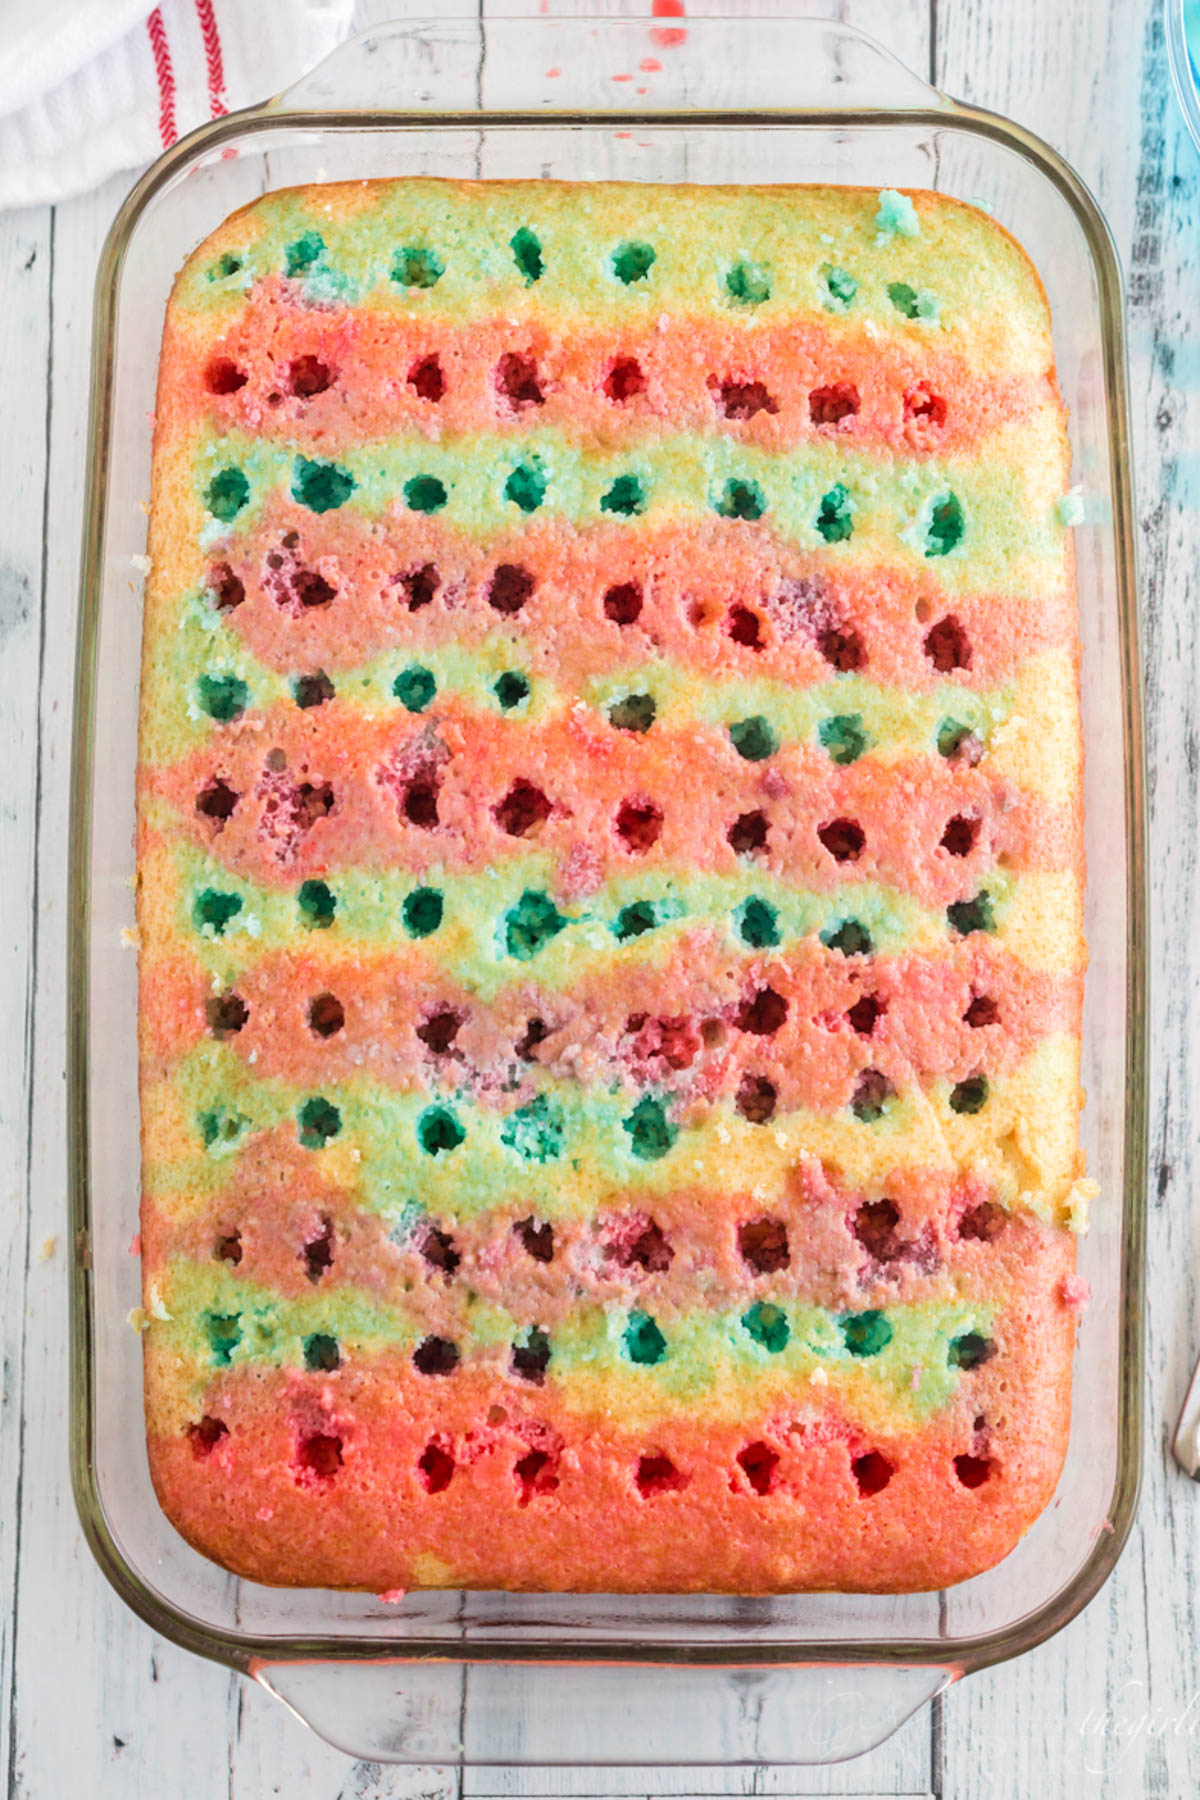 Sheet cake with lines of blue and red jello poured into the holes.